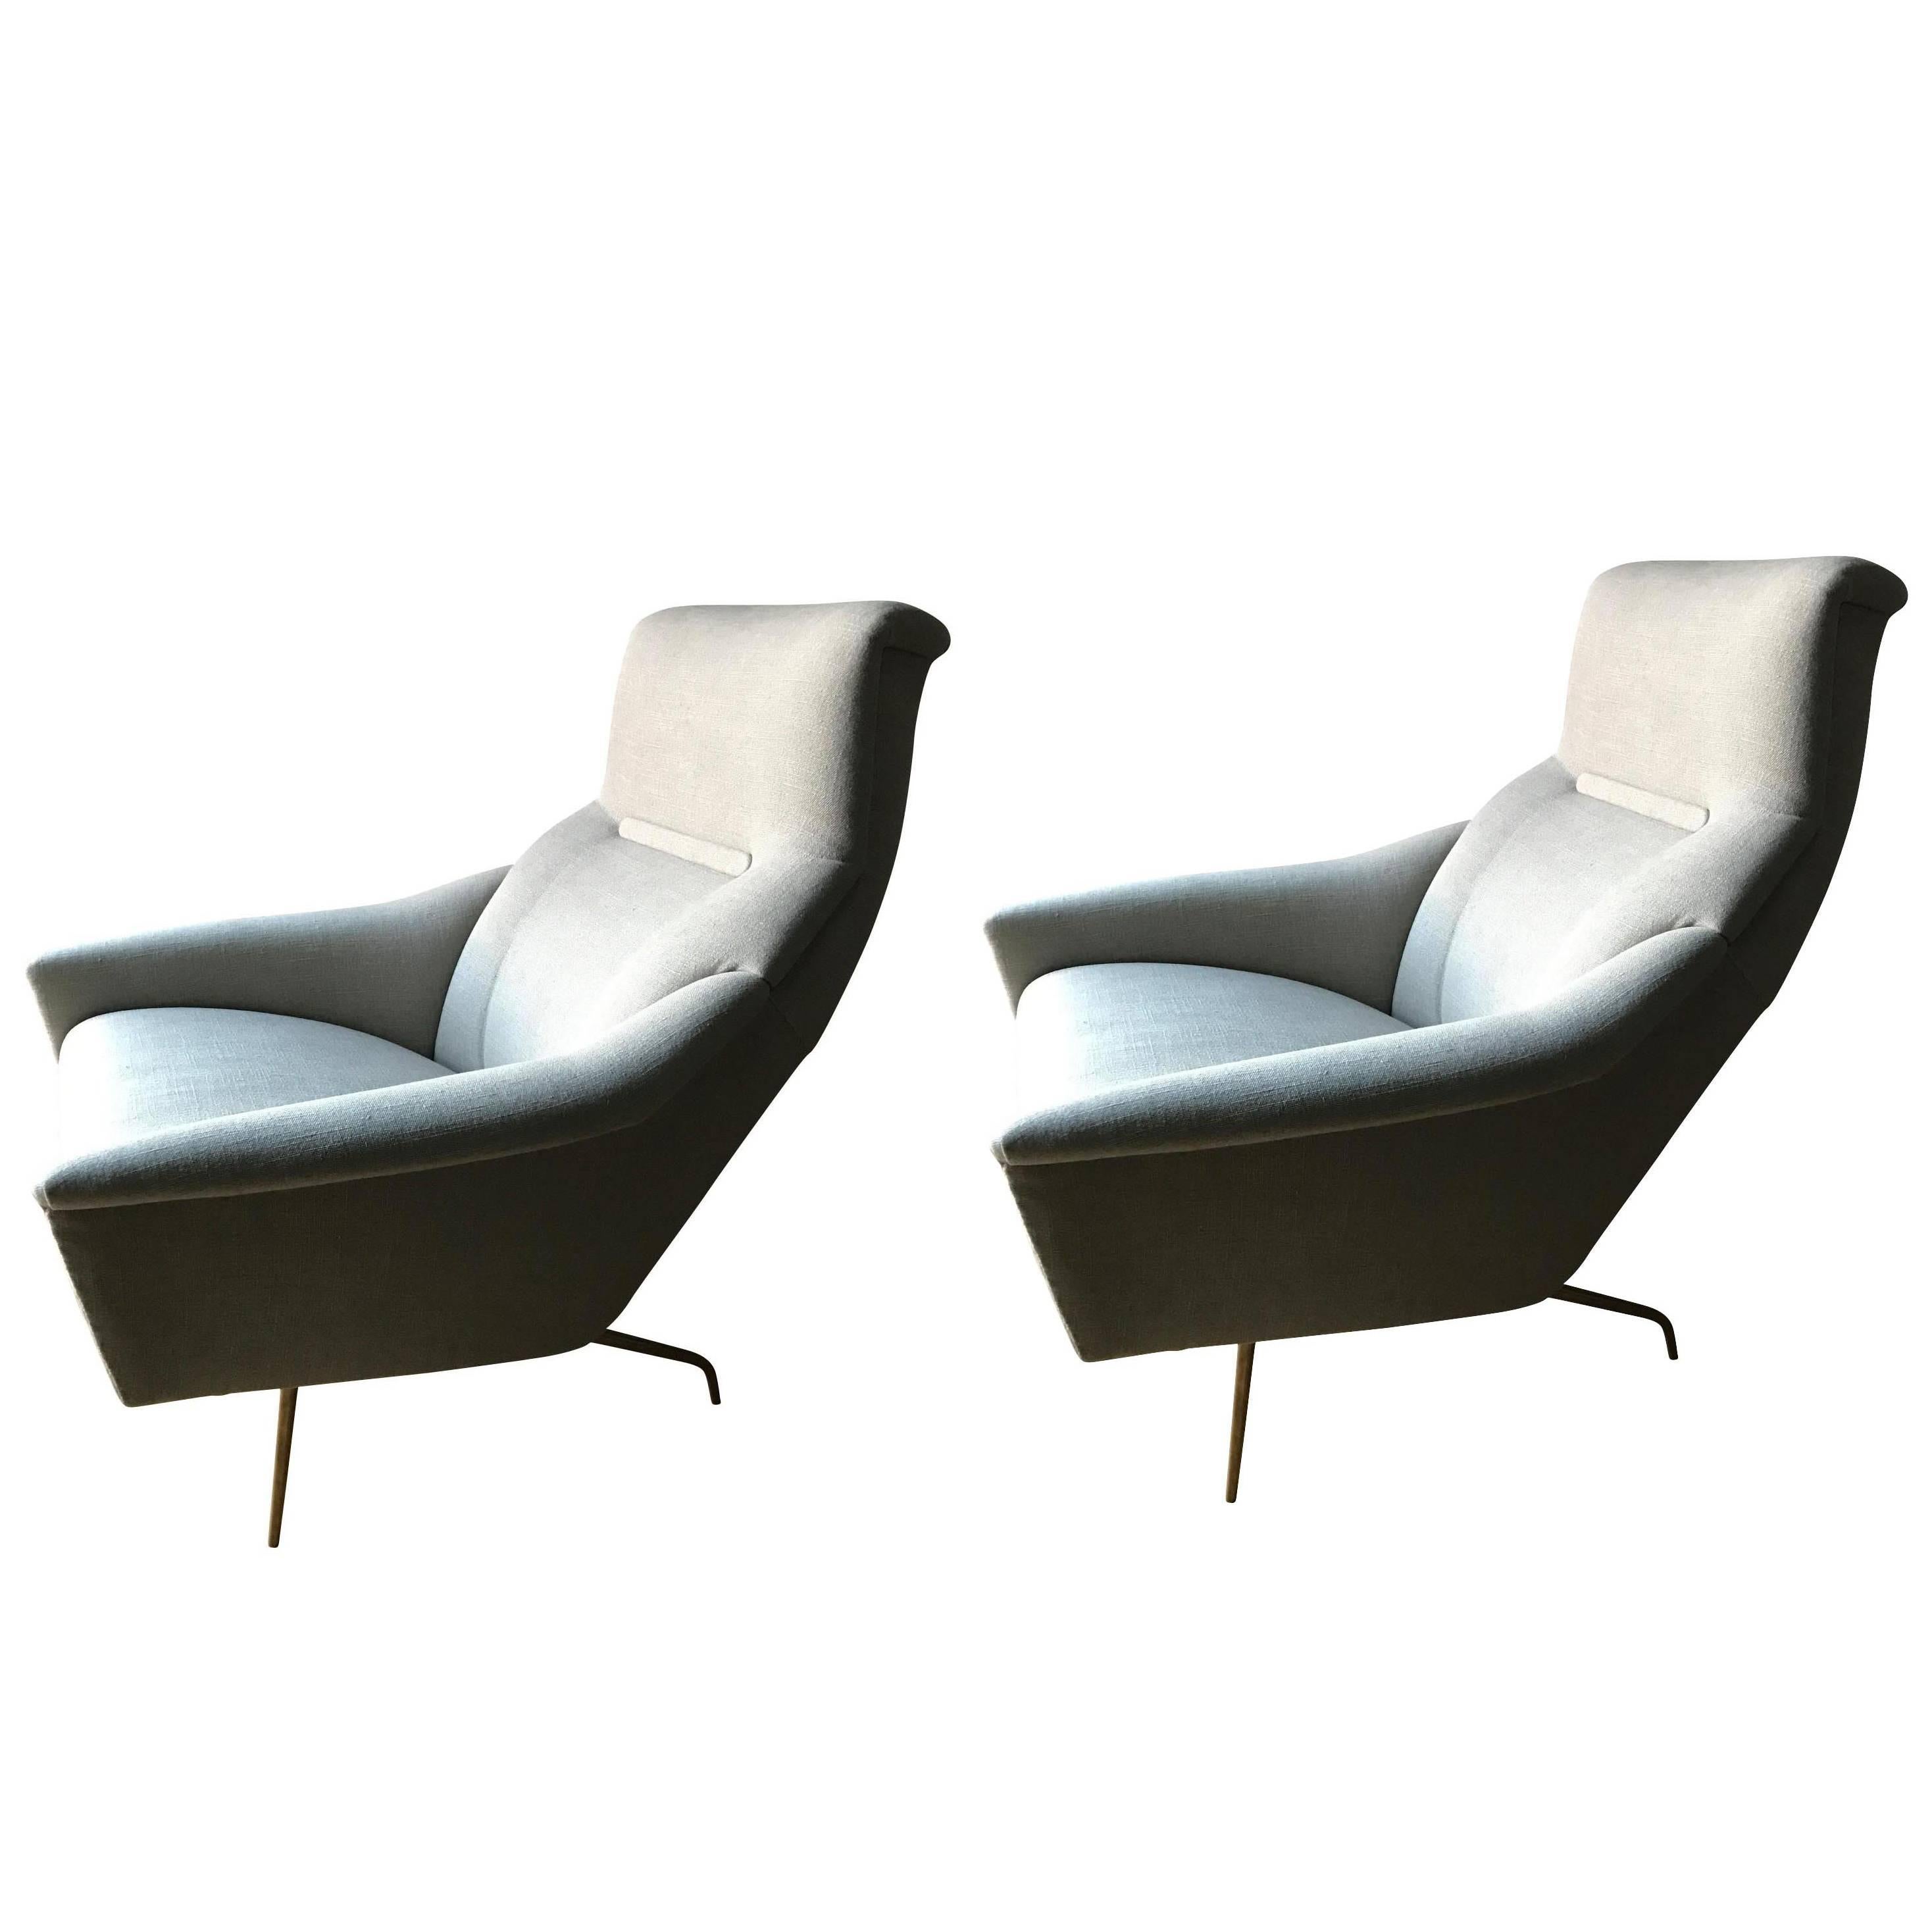 Mid-Century Pair of Guy Besnard Chairs, France, 1960s